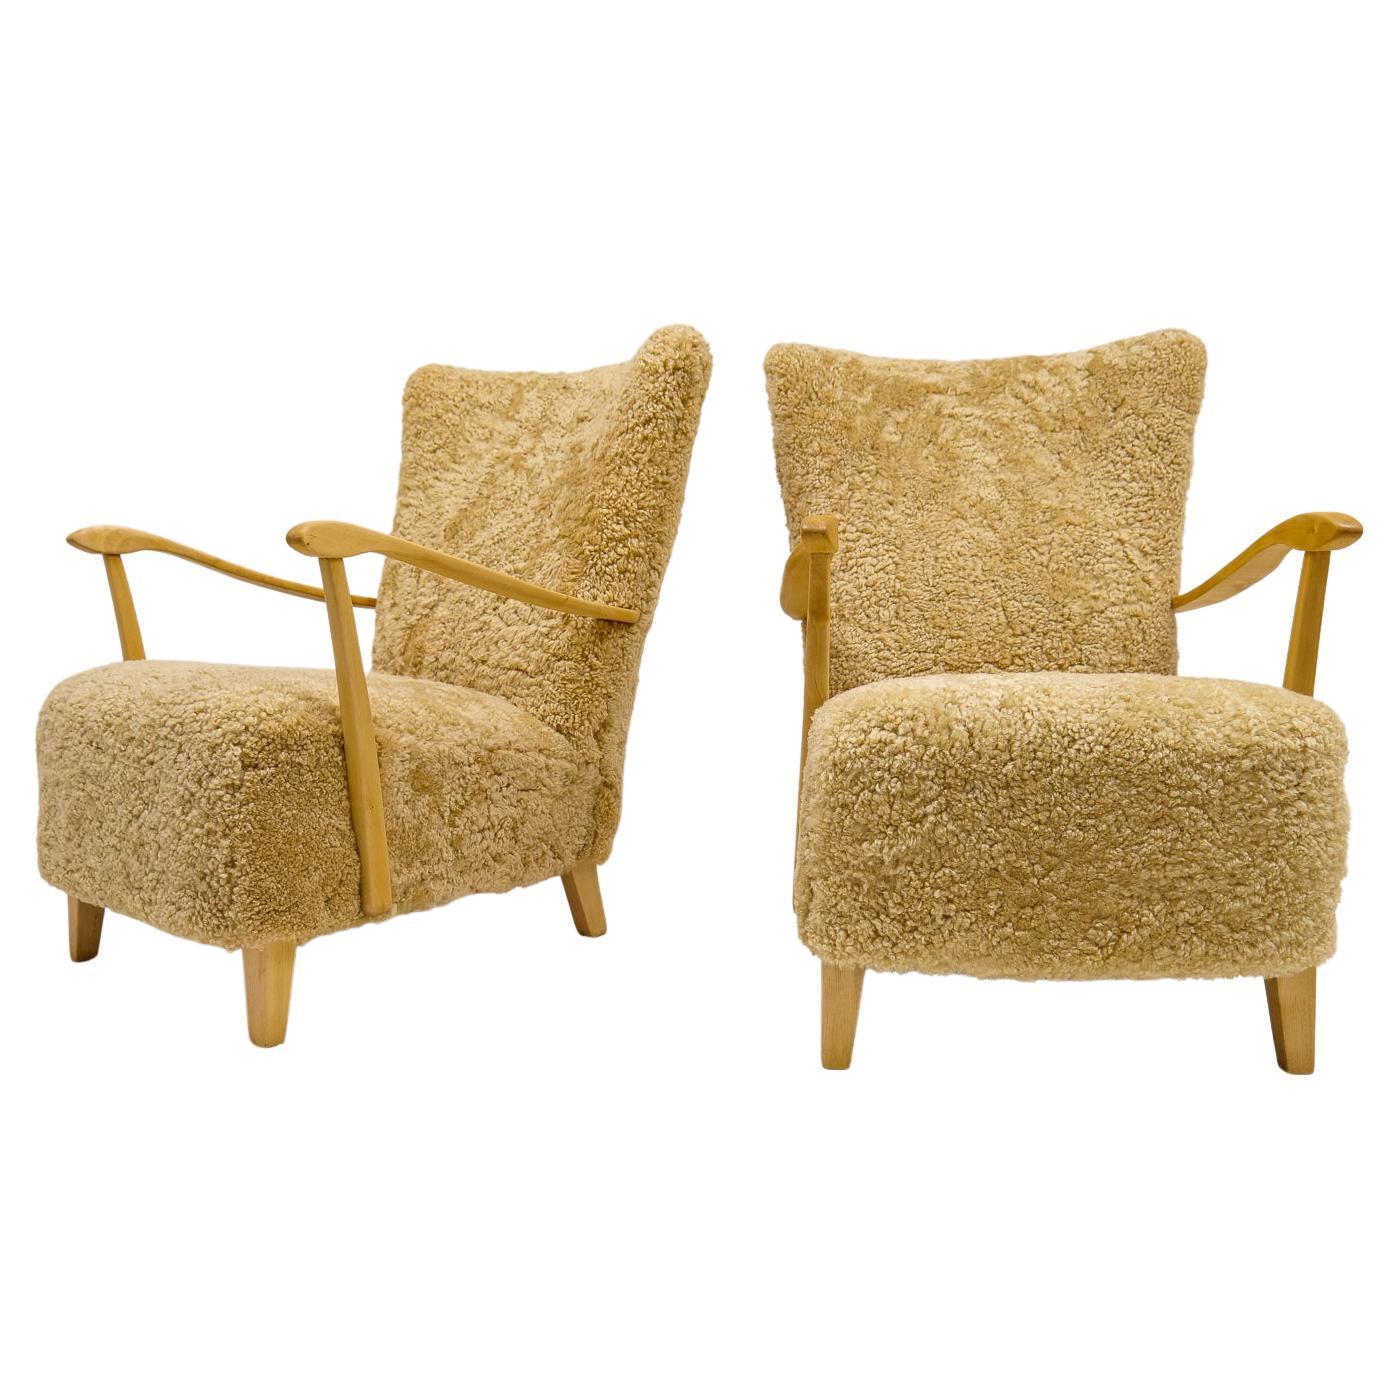 Wonderful armchairs / easy chairs in beech produced for the famous DUX company in Sweden.
Wonderful, detailed, and curved stained beech wood and all new upholstery in quality sheepskin. The sheepskin is honey colored and worked prefect with the